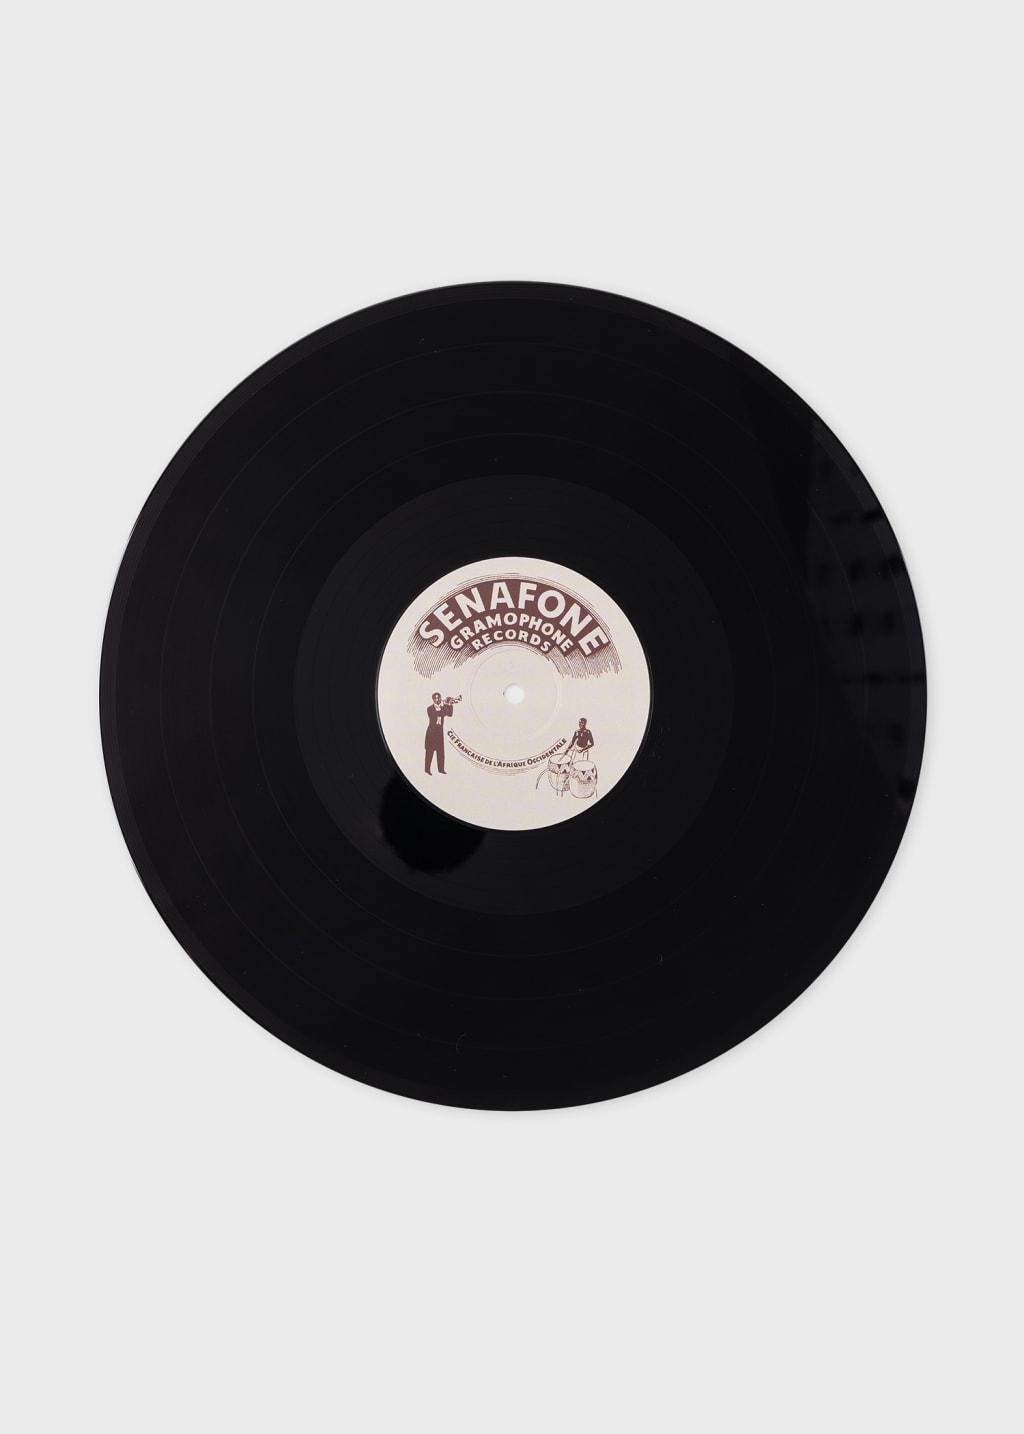 Product View - 'Marvellous Boy: Calypso From West Africa' Vinyl 2 x LP